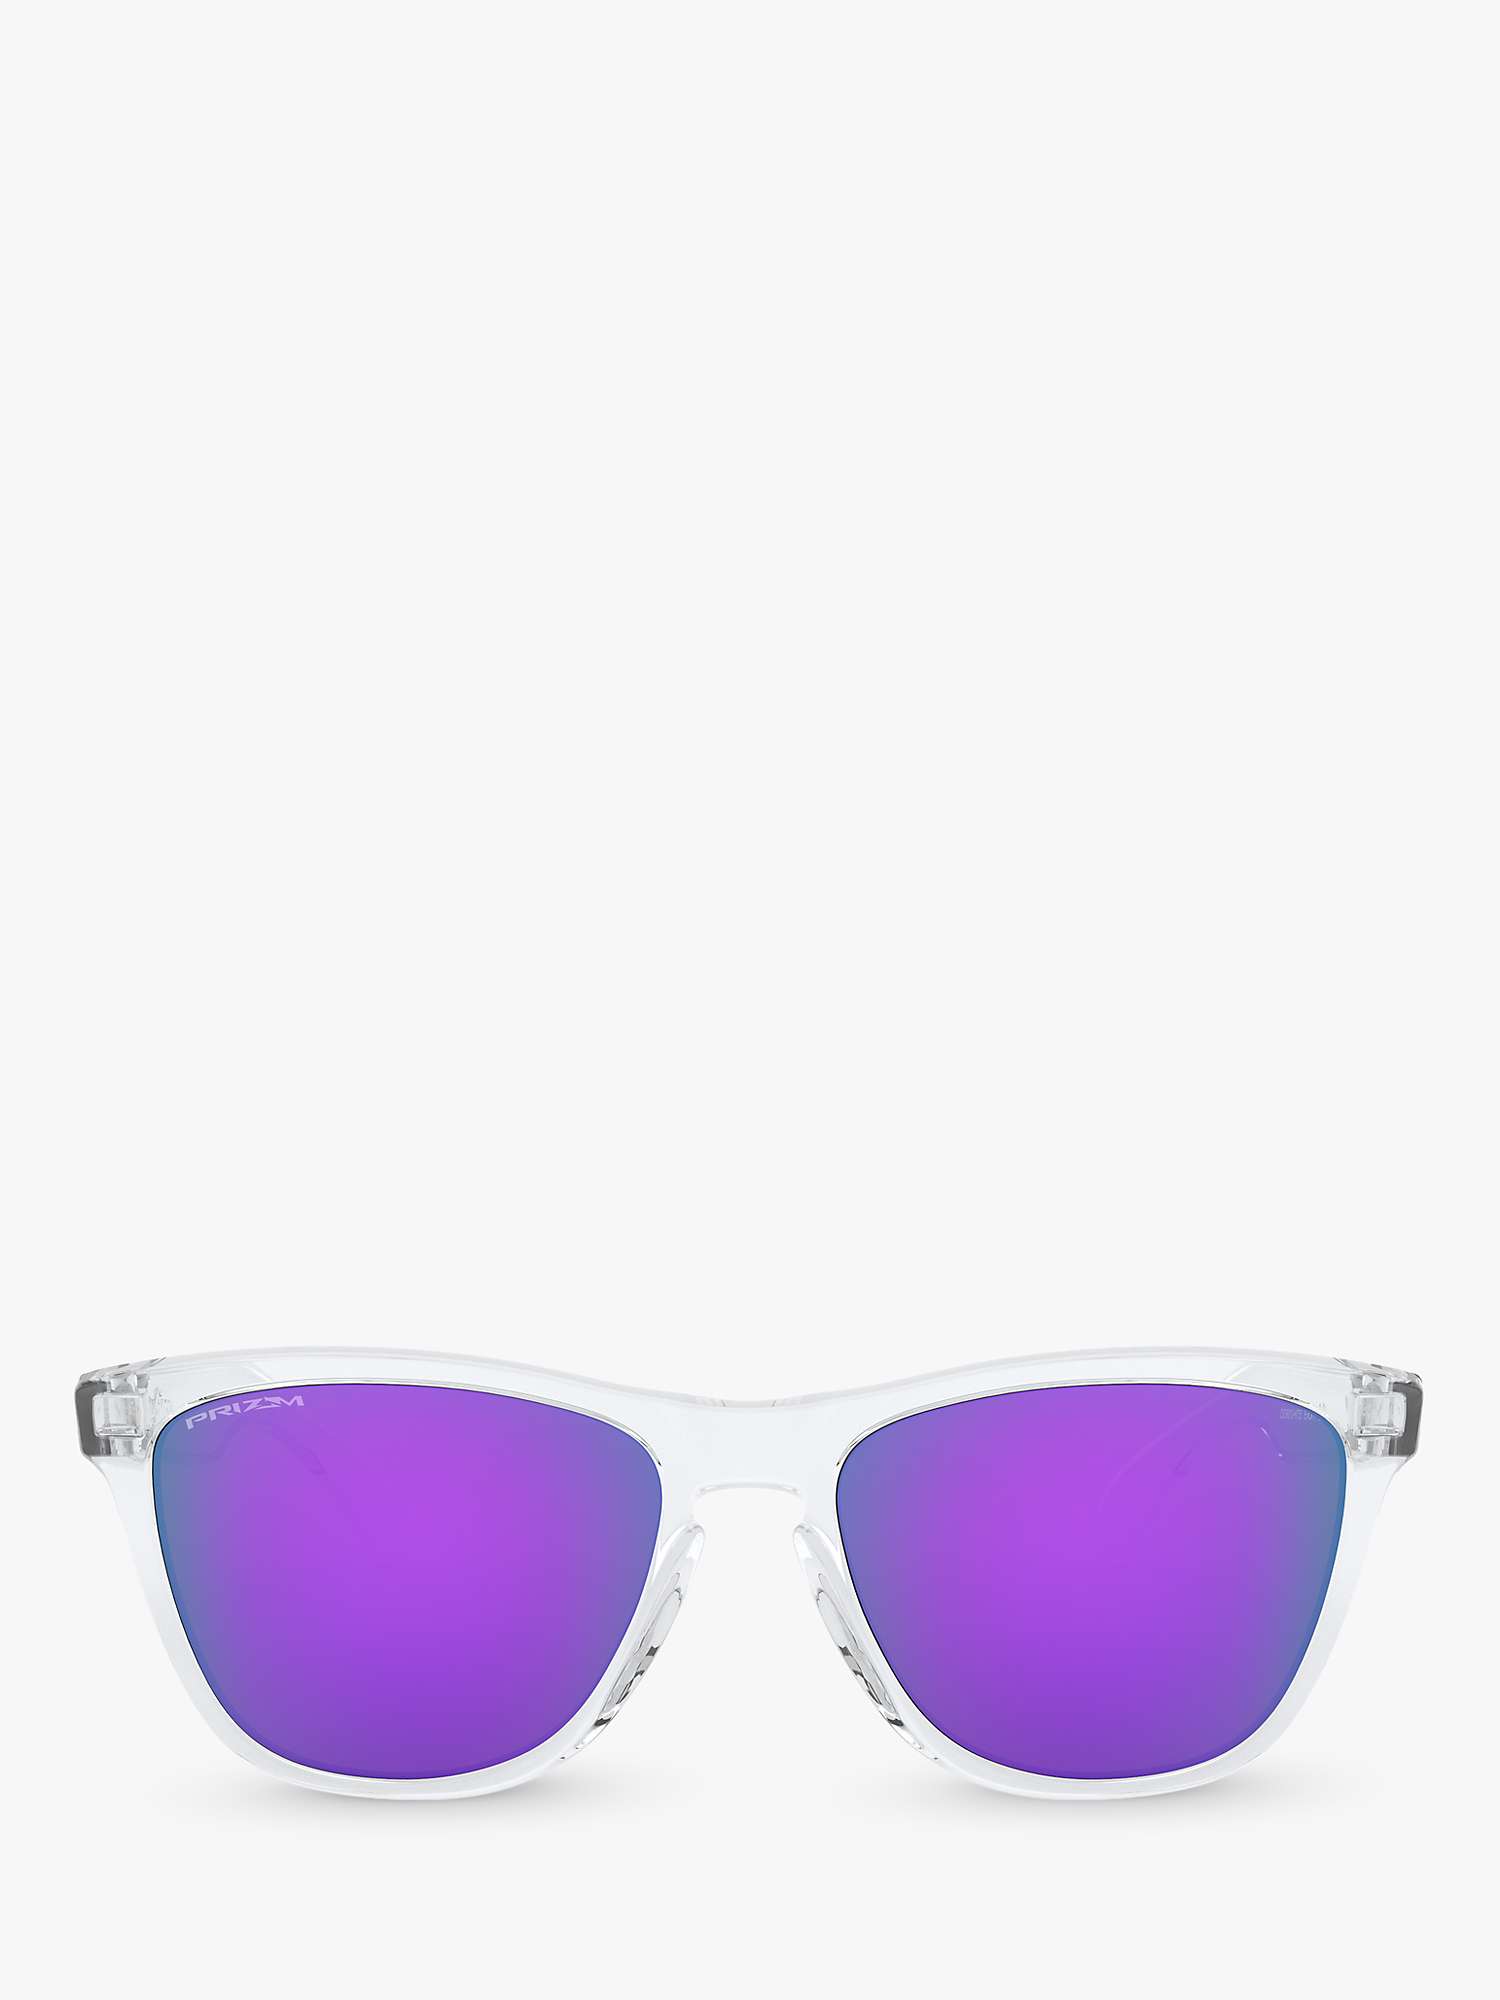 Buy Oakley OO9013 Men's Frogskins Prizm Square Sunglasses, Clear/Mirror Purple Online at johnlewis.com